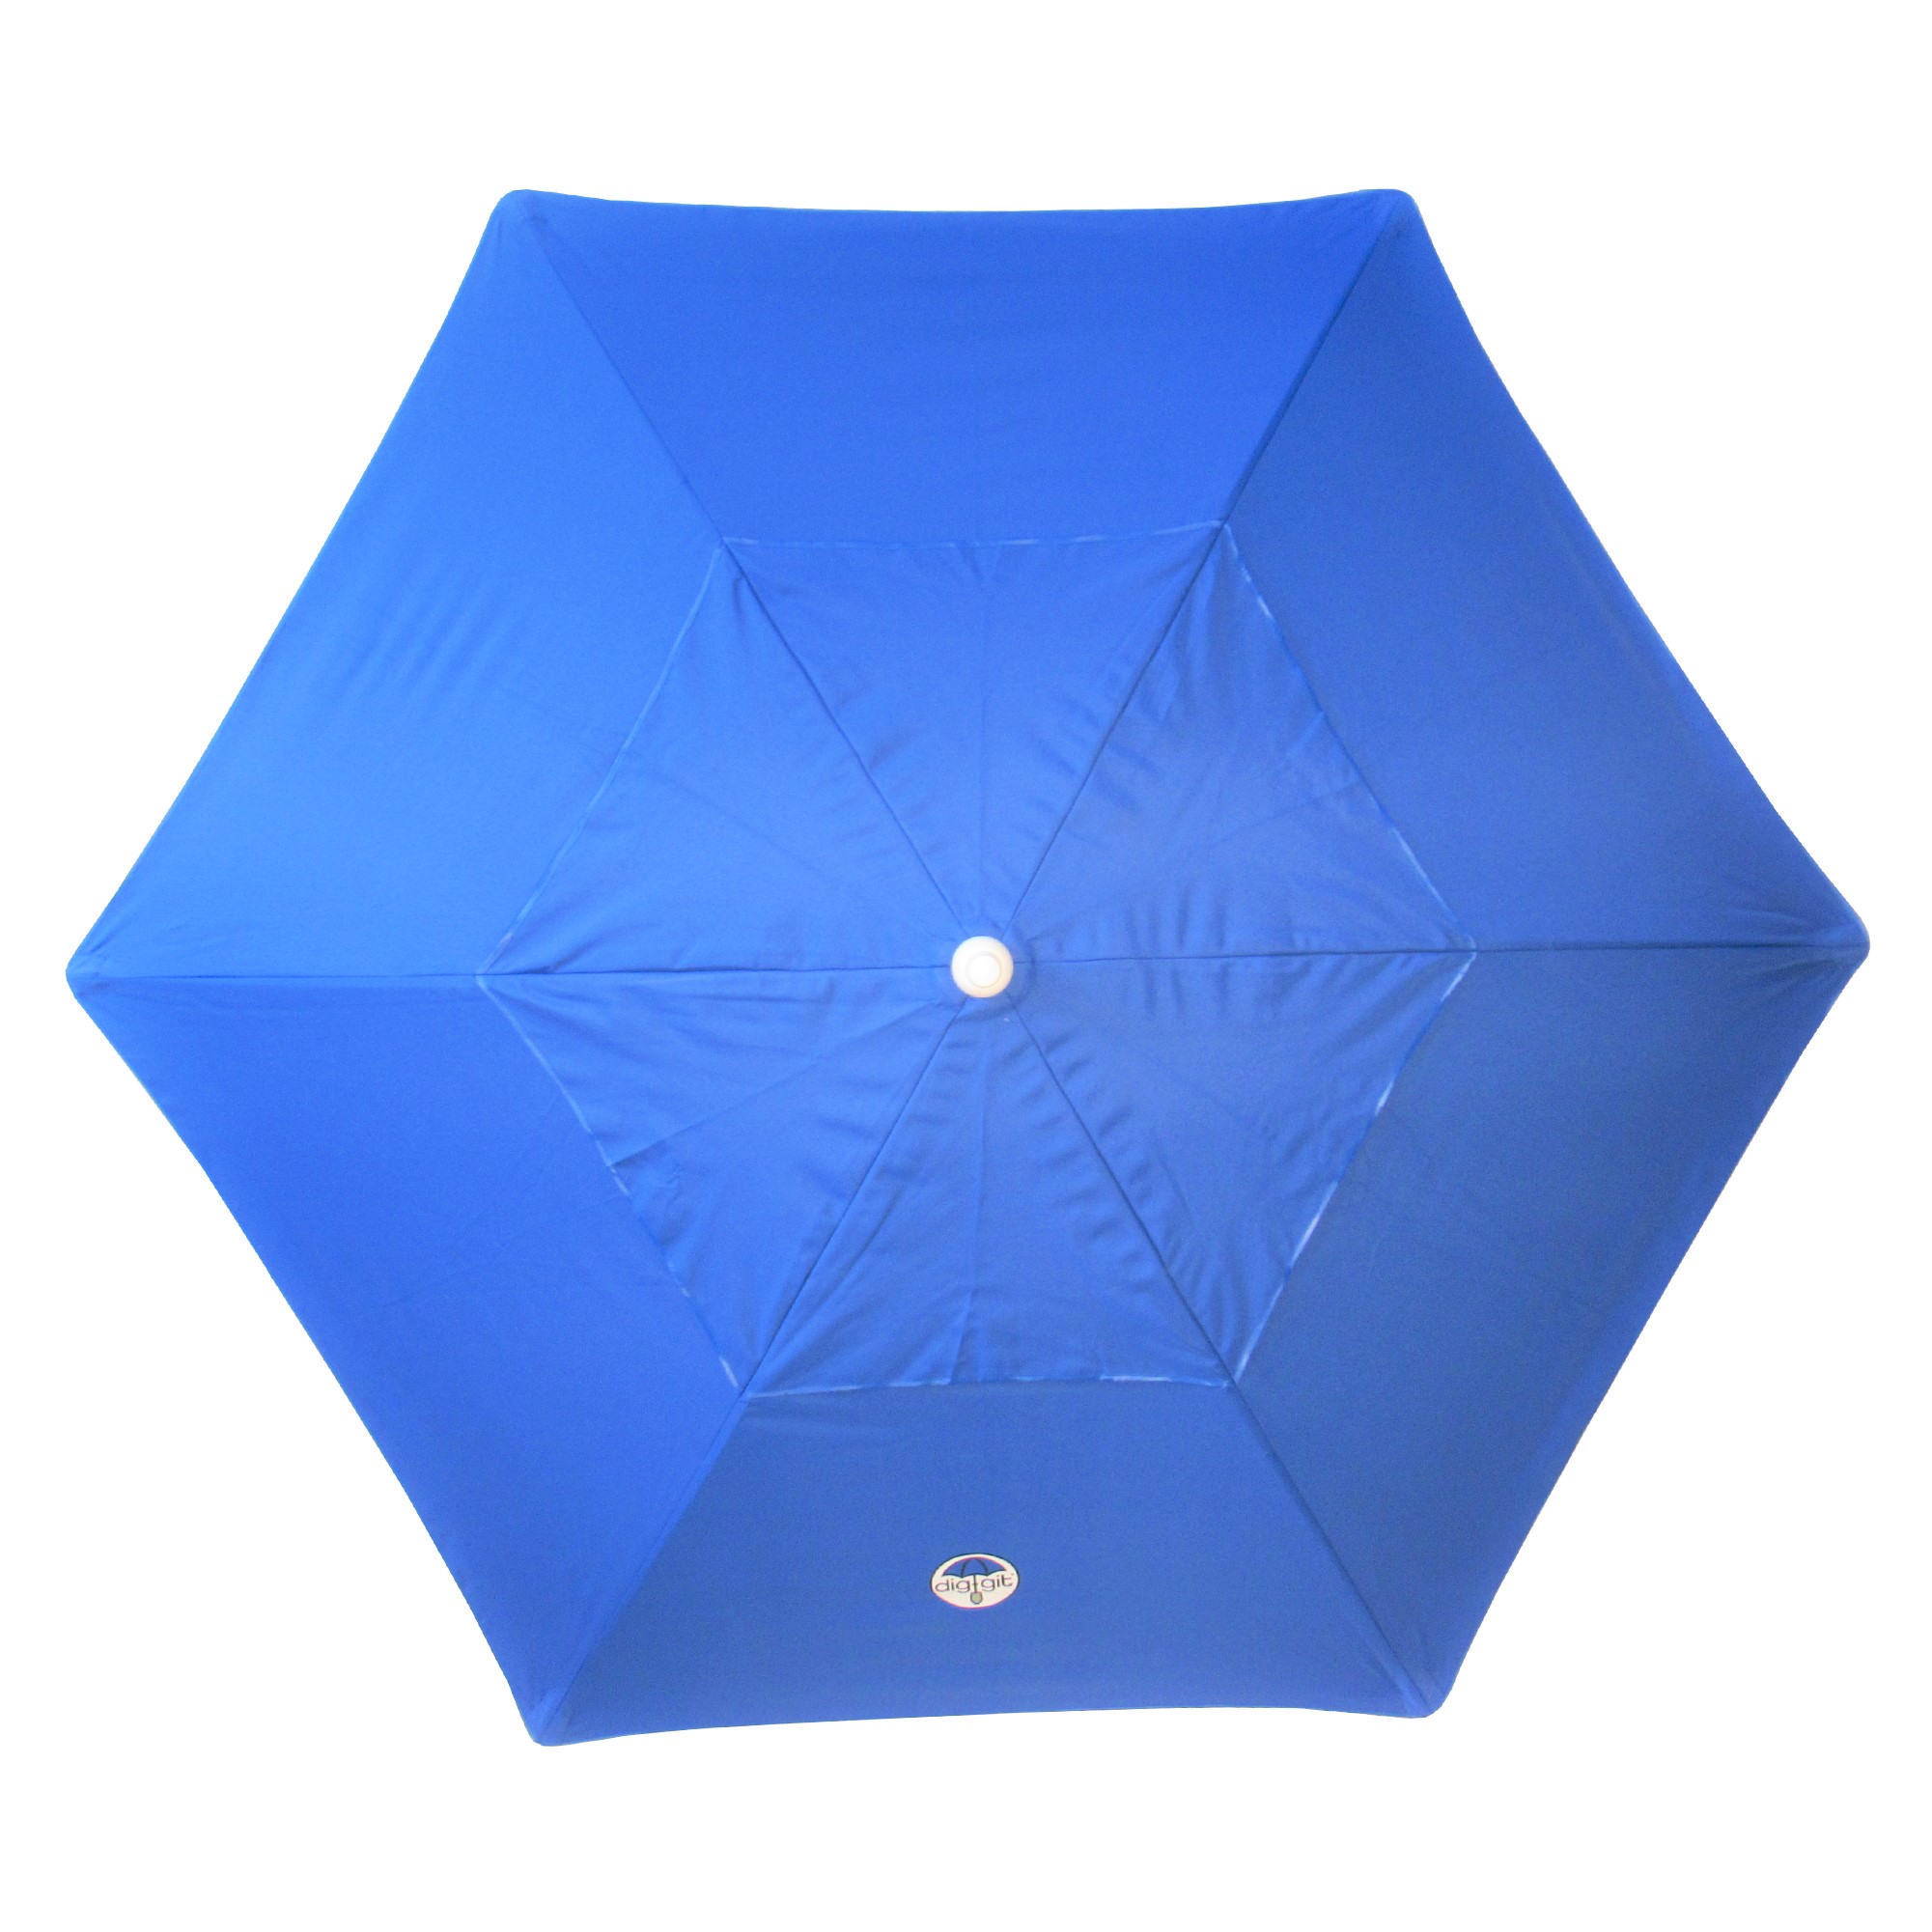 dig-git Beach Umbrella wind resistant, Royal blue vented with shovel sand anchor - image 2 of 6